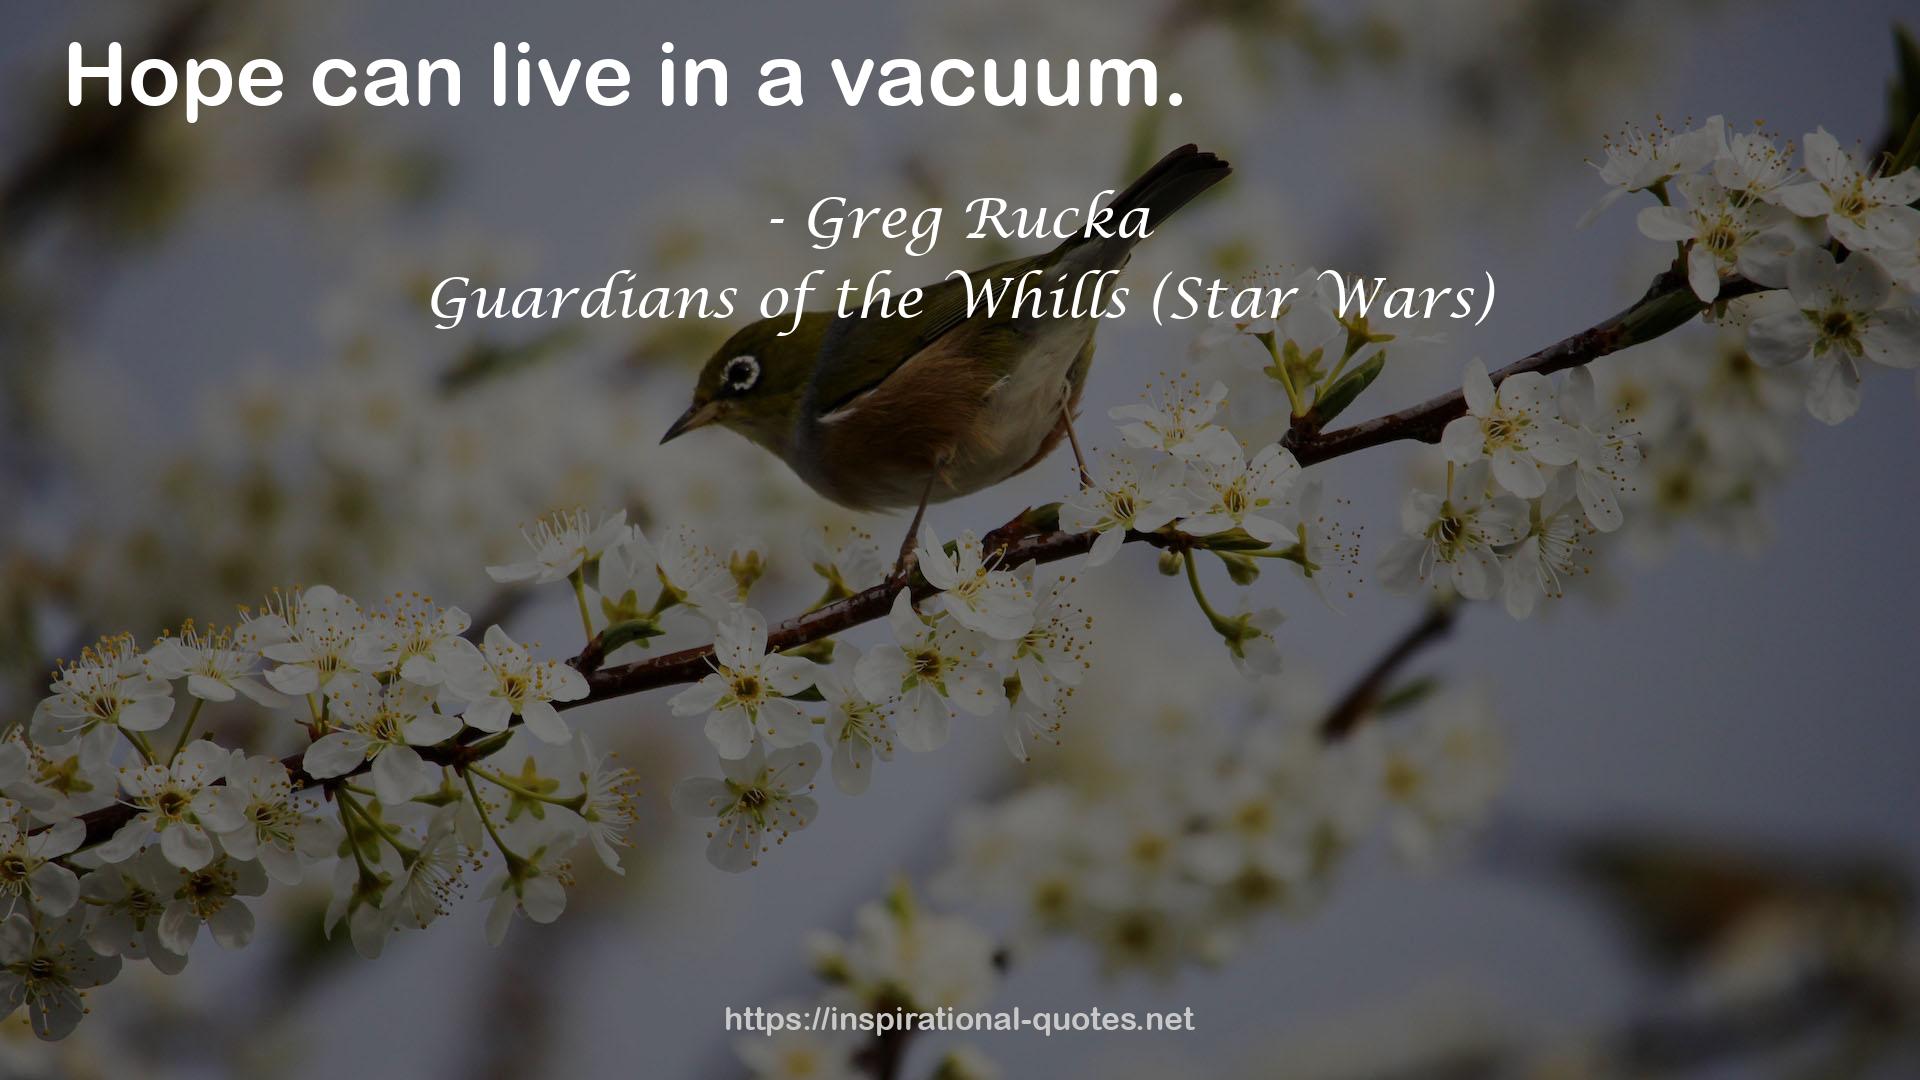 Guardians of the Whills (Star Wars) QUOTES